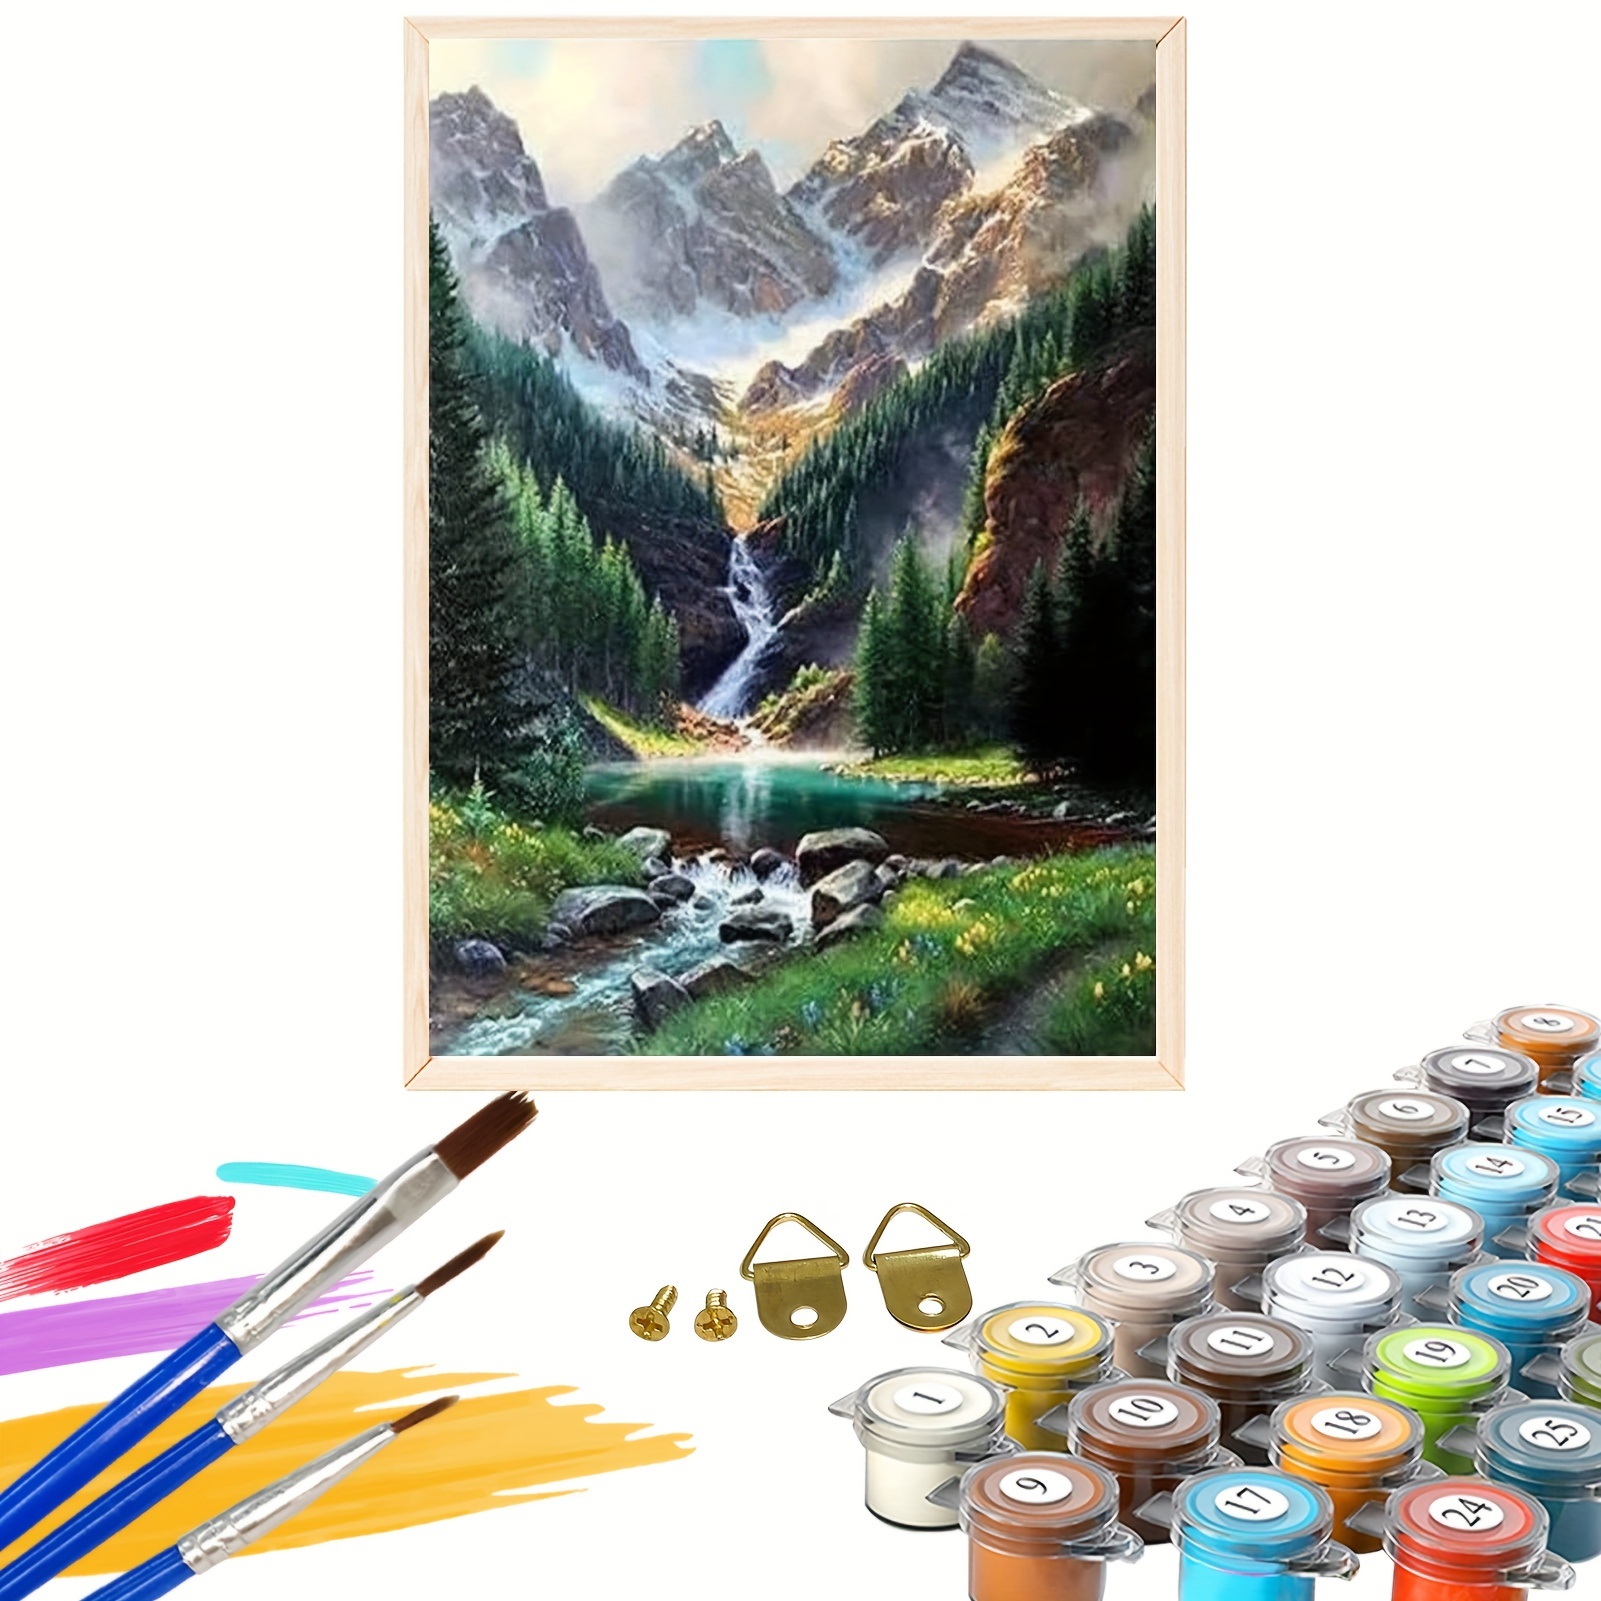 The Lake Alley - Paint by Numbers Kit for Adults DIY Oil Painting